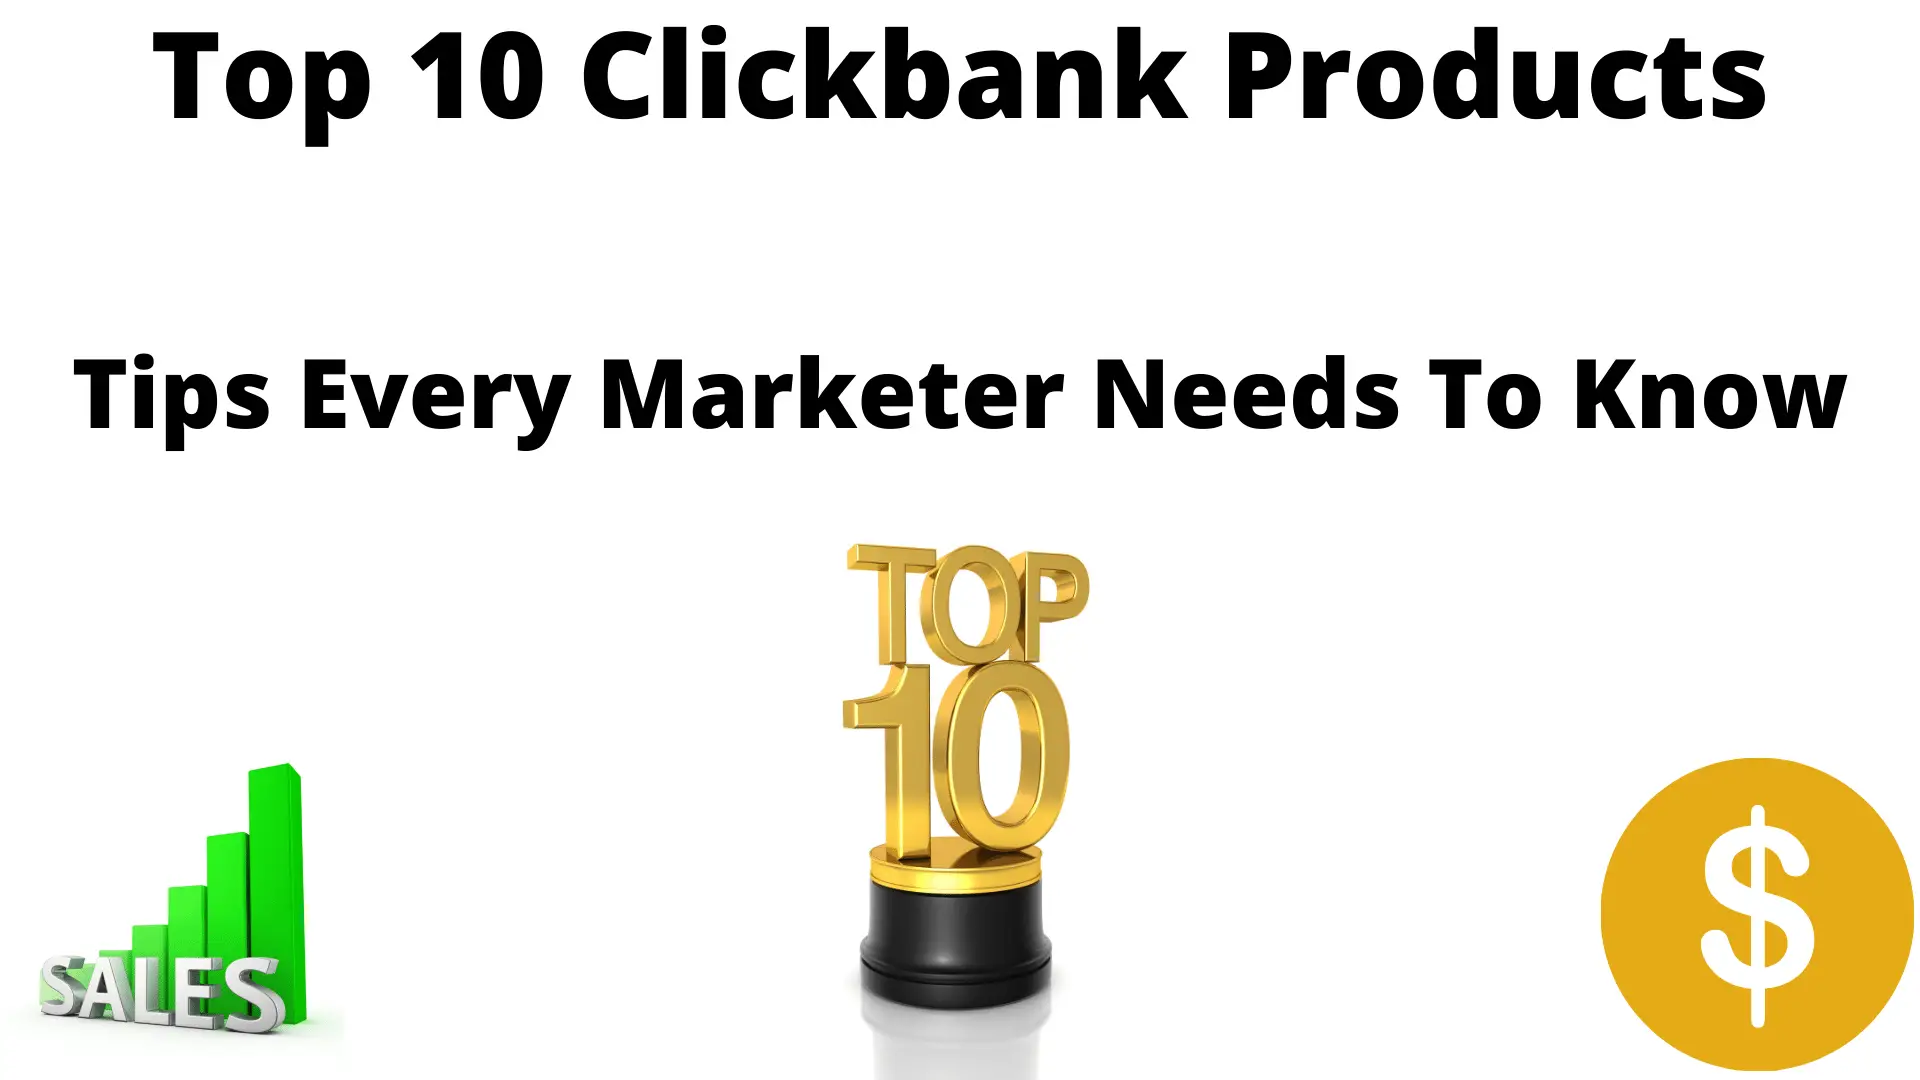 Top 10 Clickbank Products - Tips Every Marketer Needs To Know